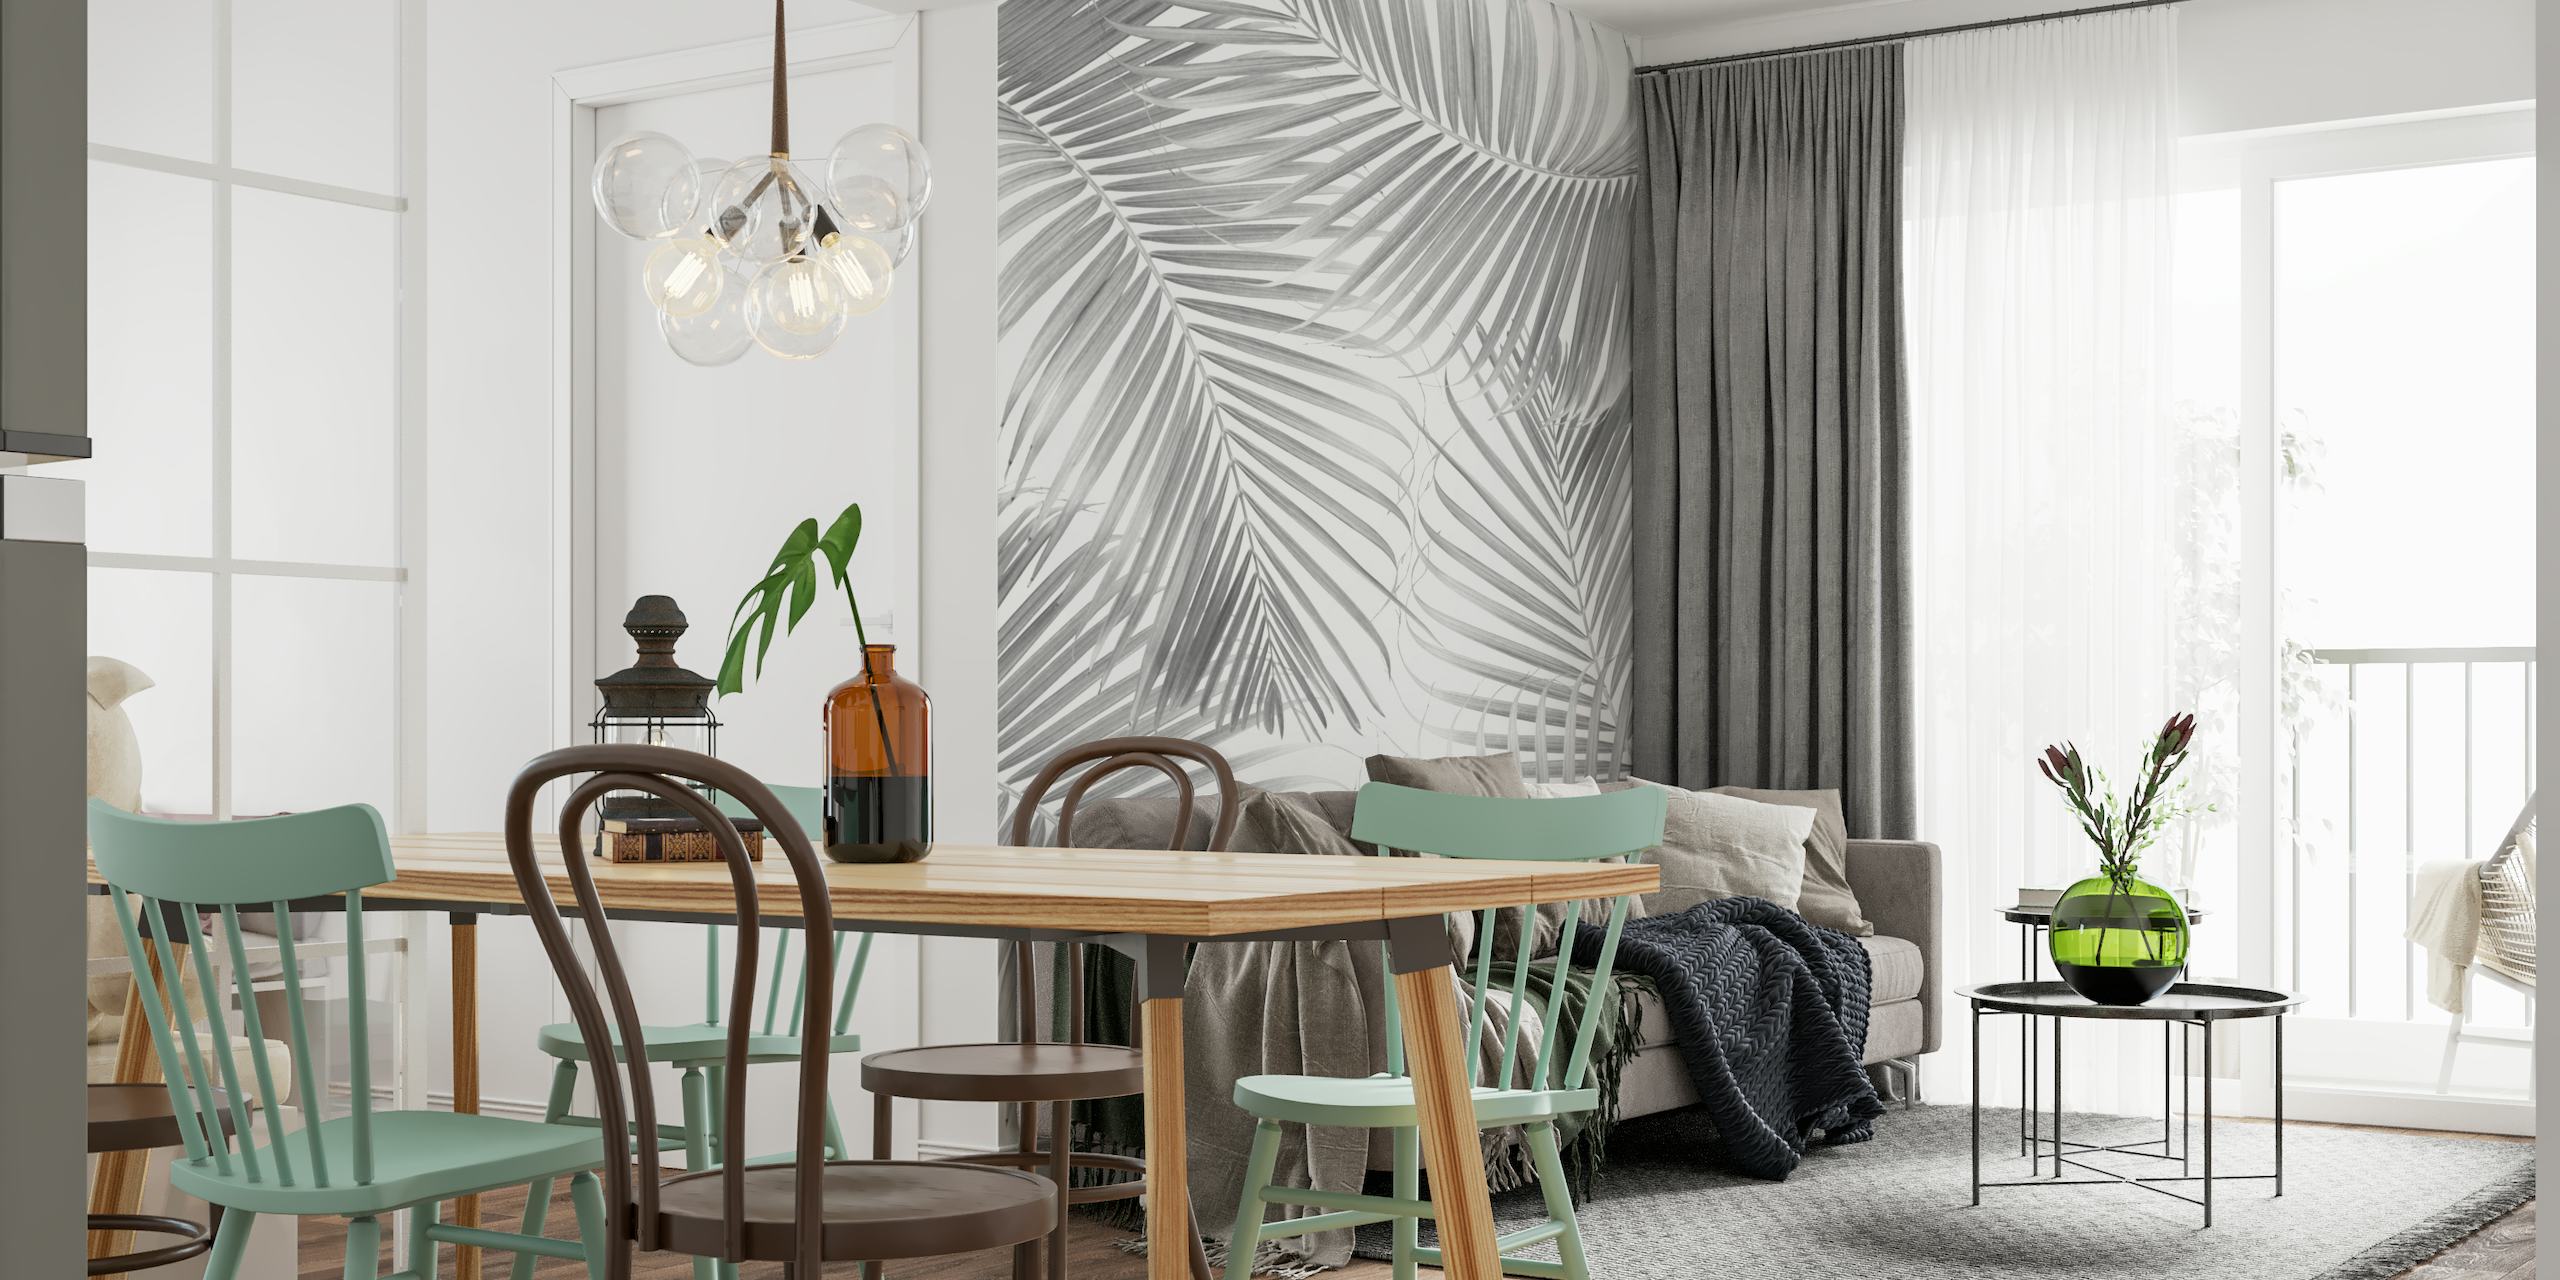 Monochrome palm leaf pattern wall mural for a tranquil interior decor